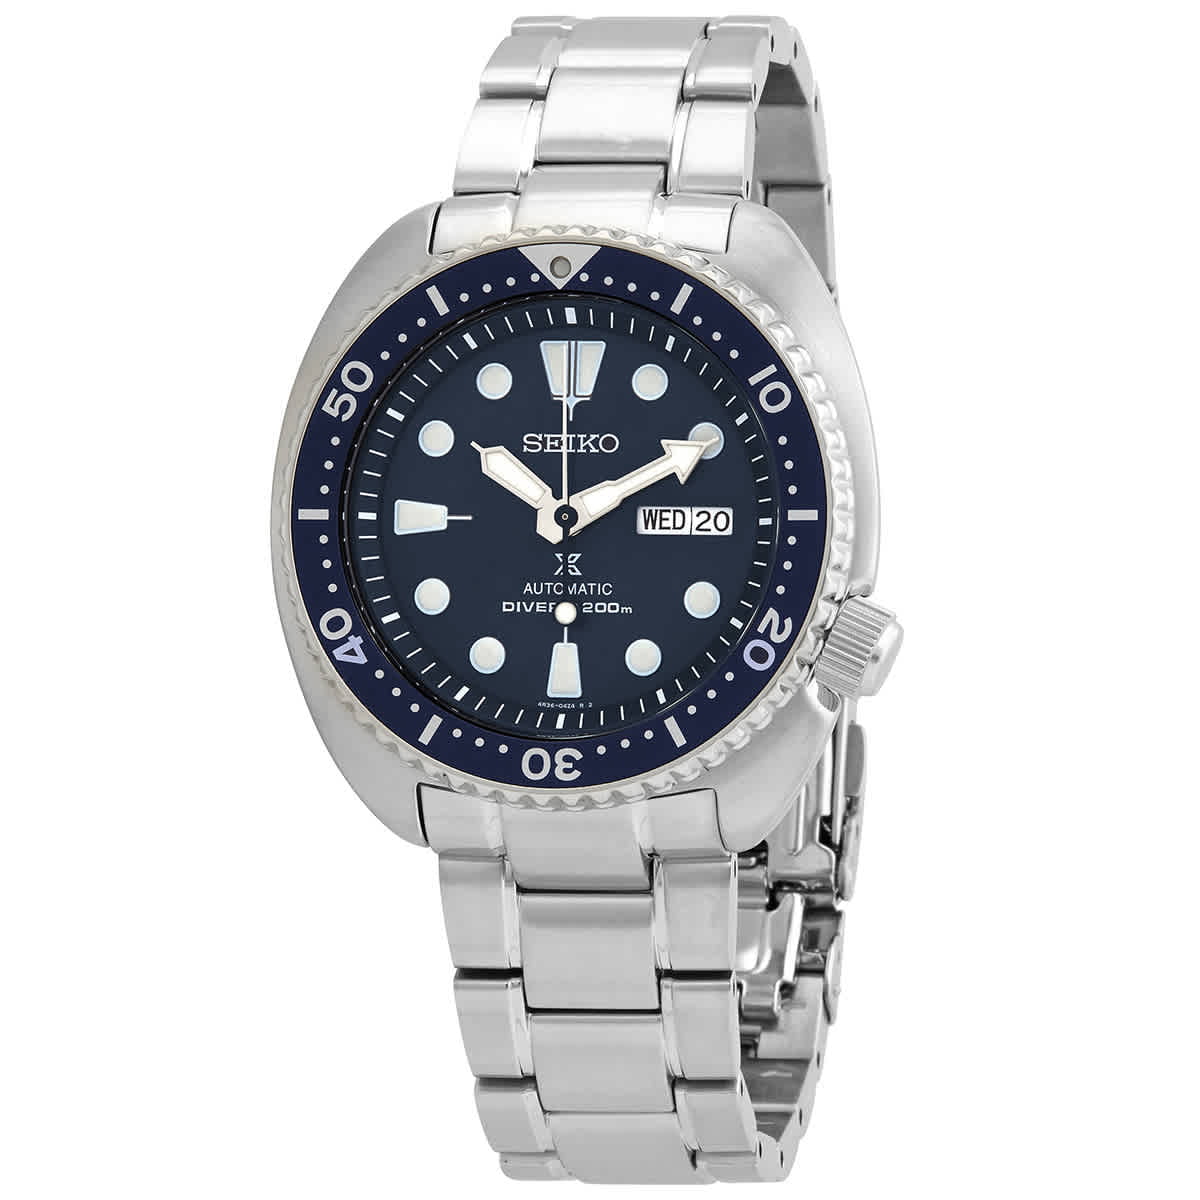 Seiko Prospex Automatic Blue Dial Stainless Steel Men's Watch SRPE89K1 -  